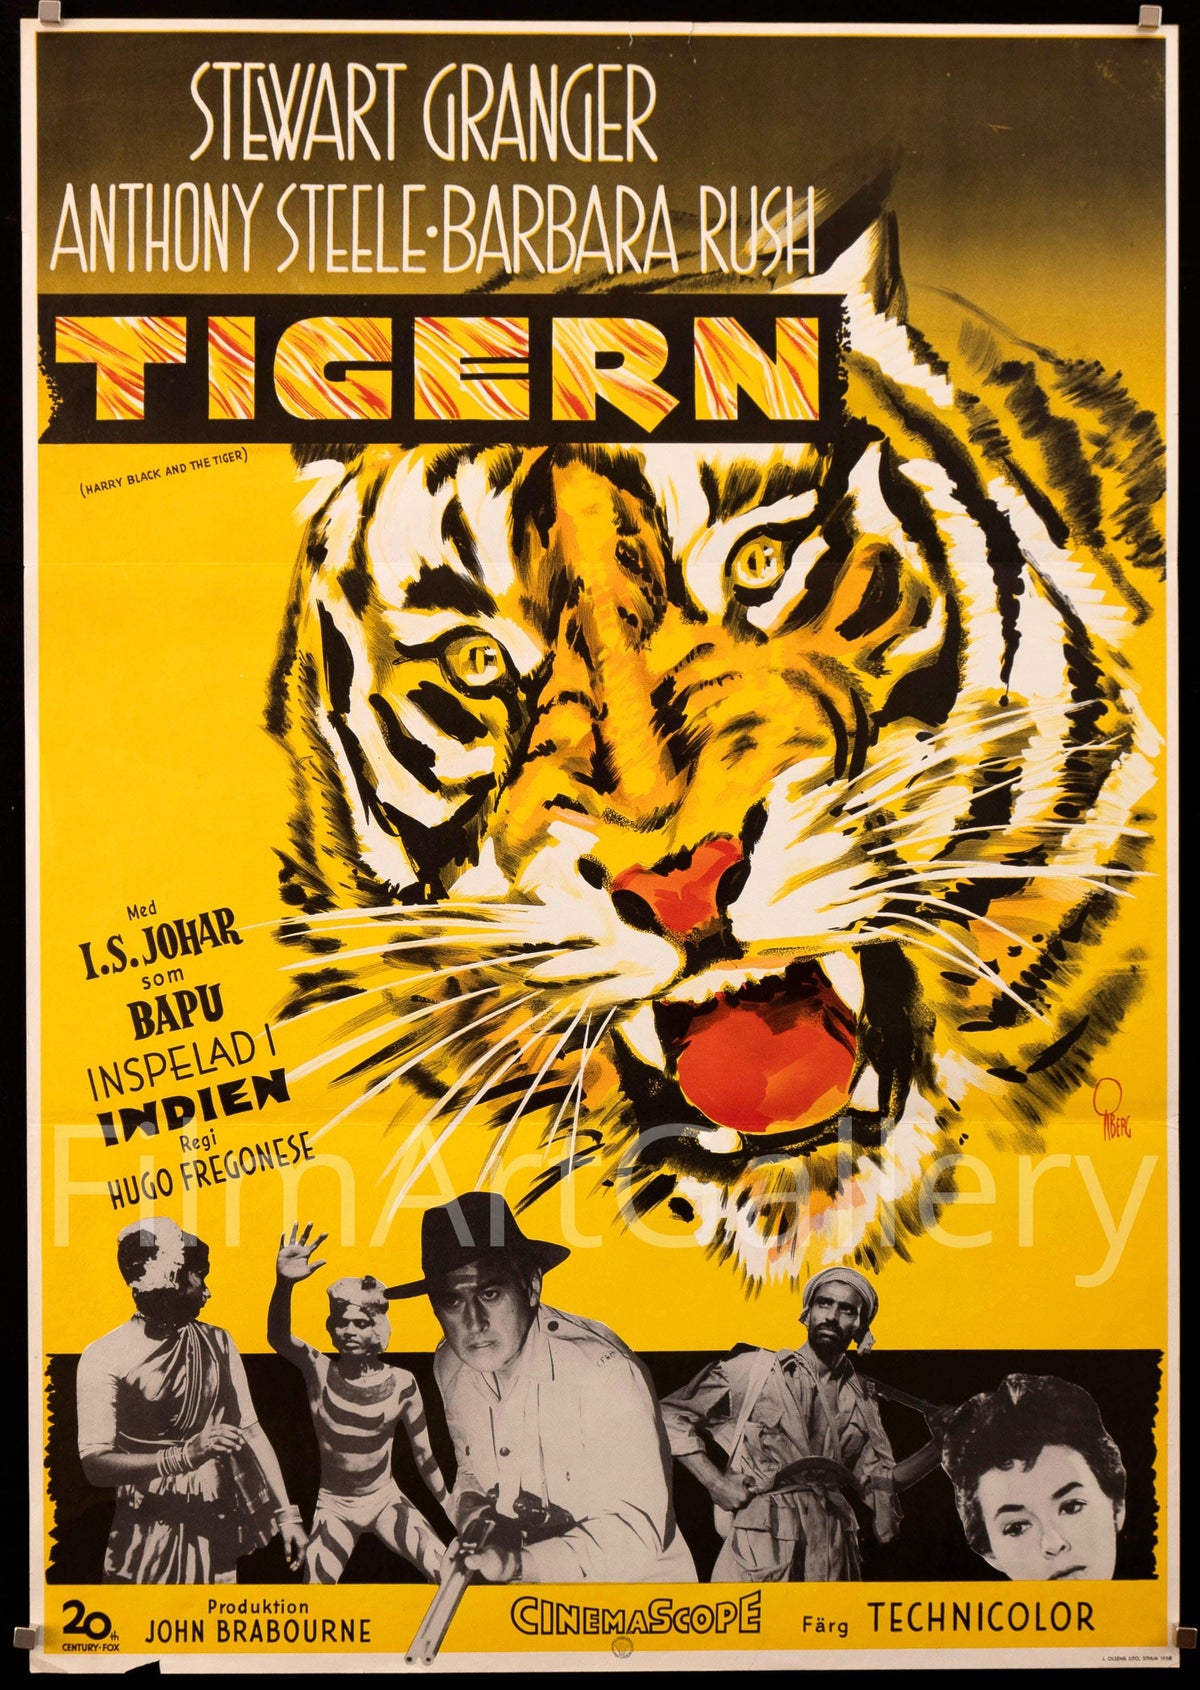 The Adventurous Life Story of Harry Black and the Tiger 1 Sheet (27x41) Original Vintage Movie Poster